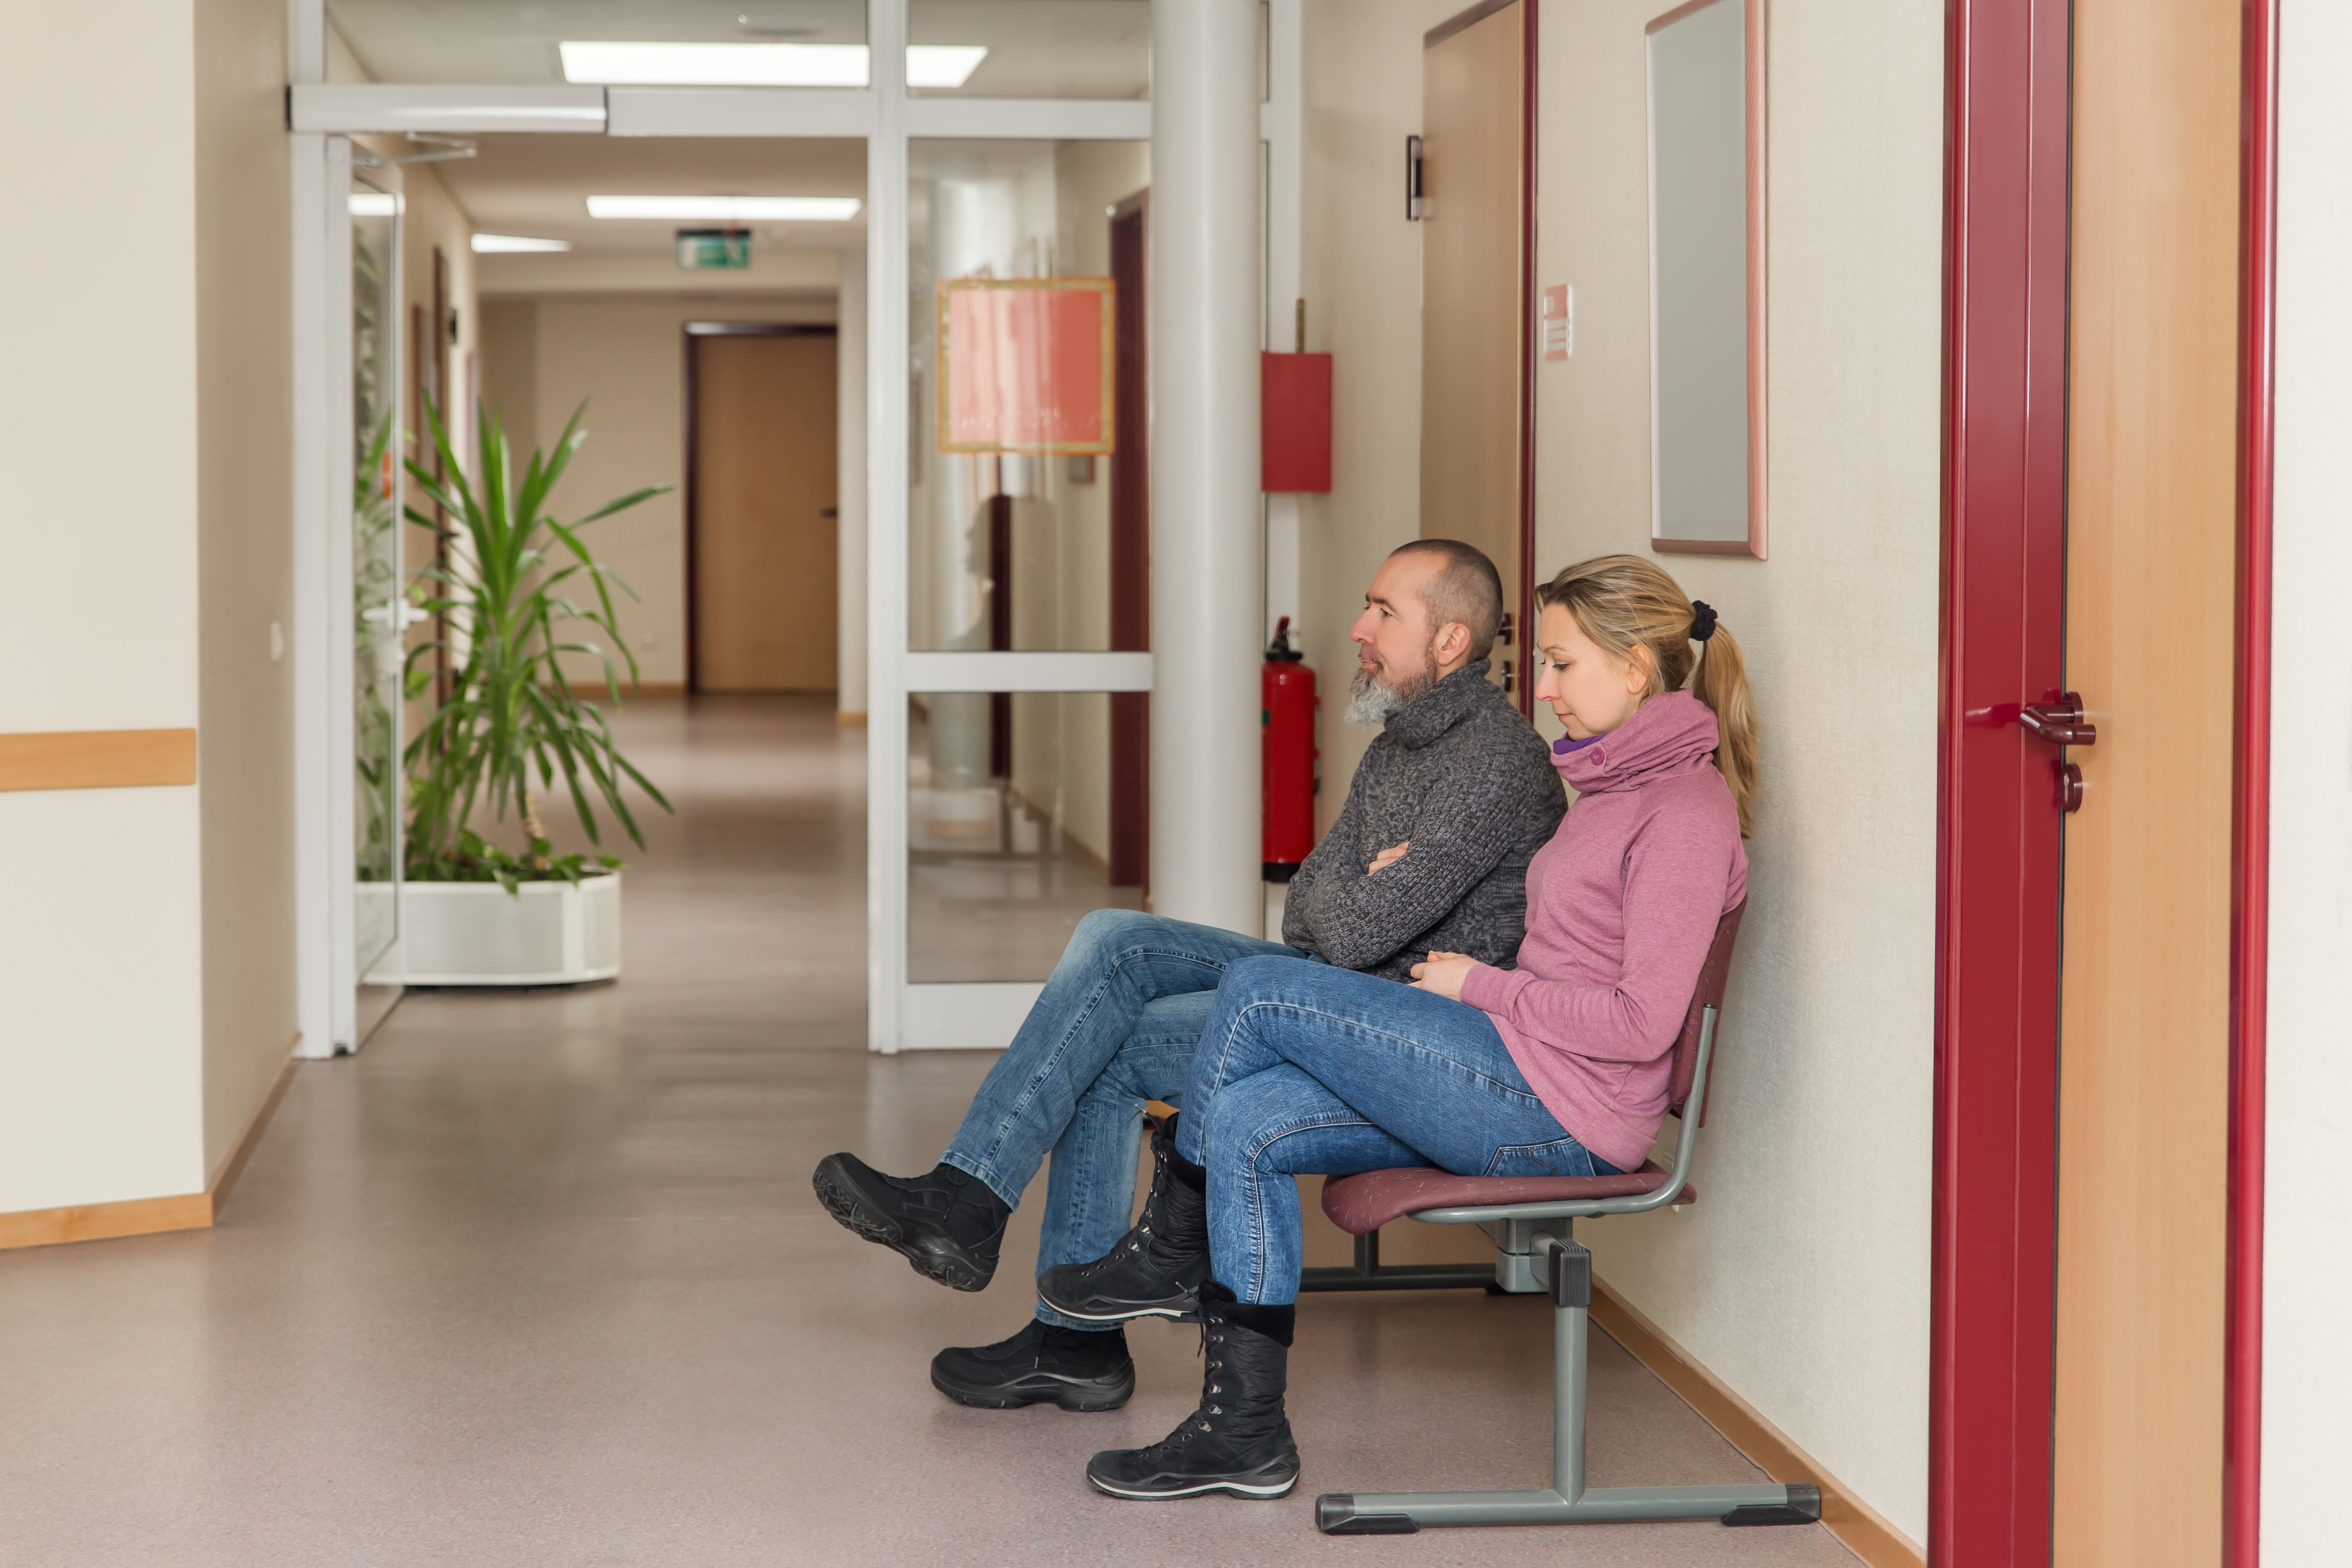 Nervous couple is sitting in corridor and waiting | Source: Shutterstock.com